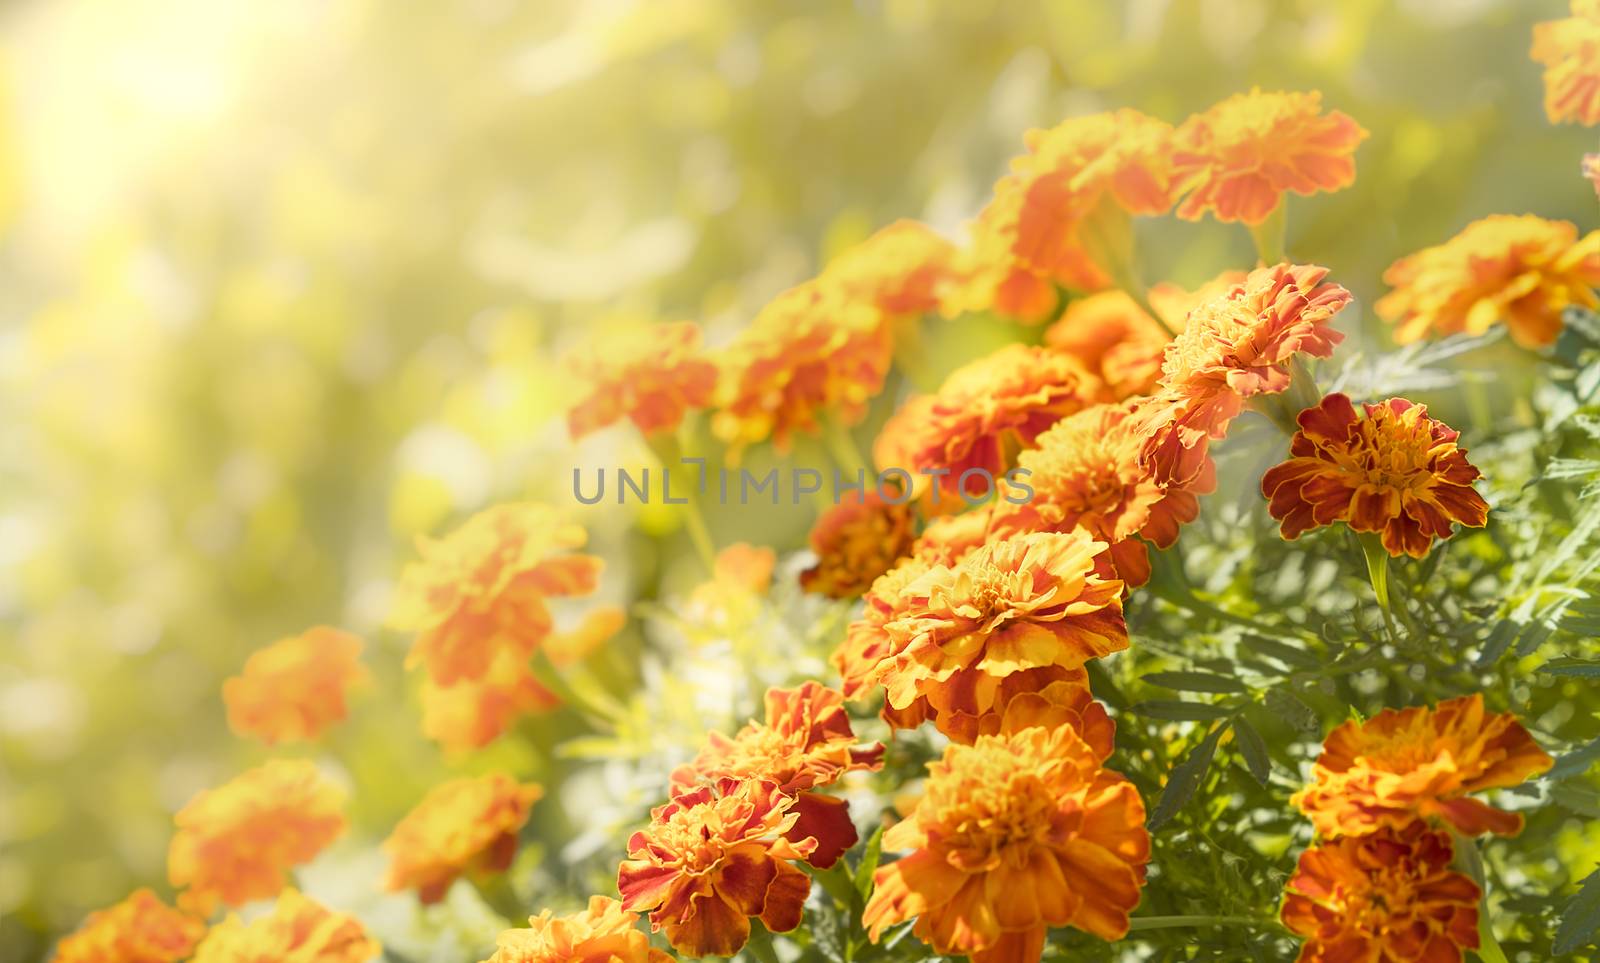 Autumn tones of orange and yellow marigolds by sherj